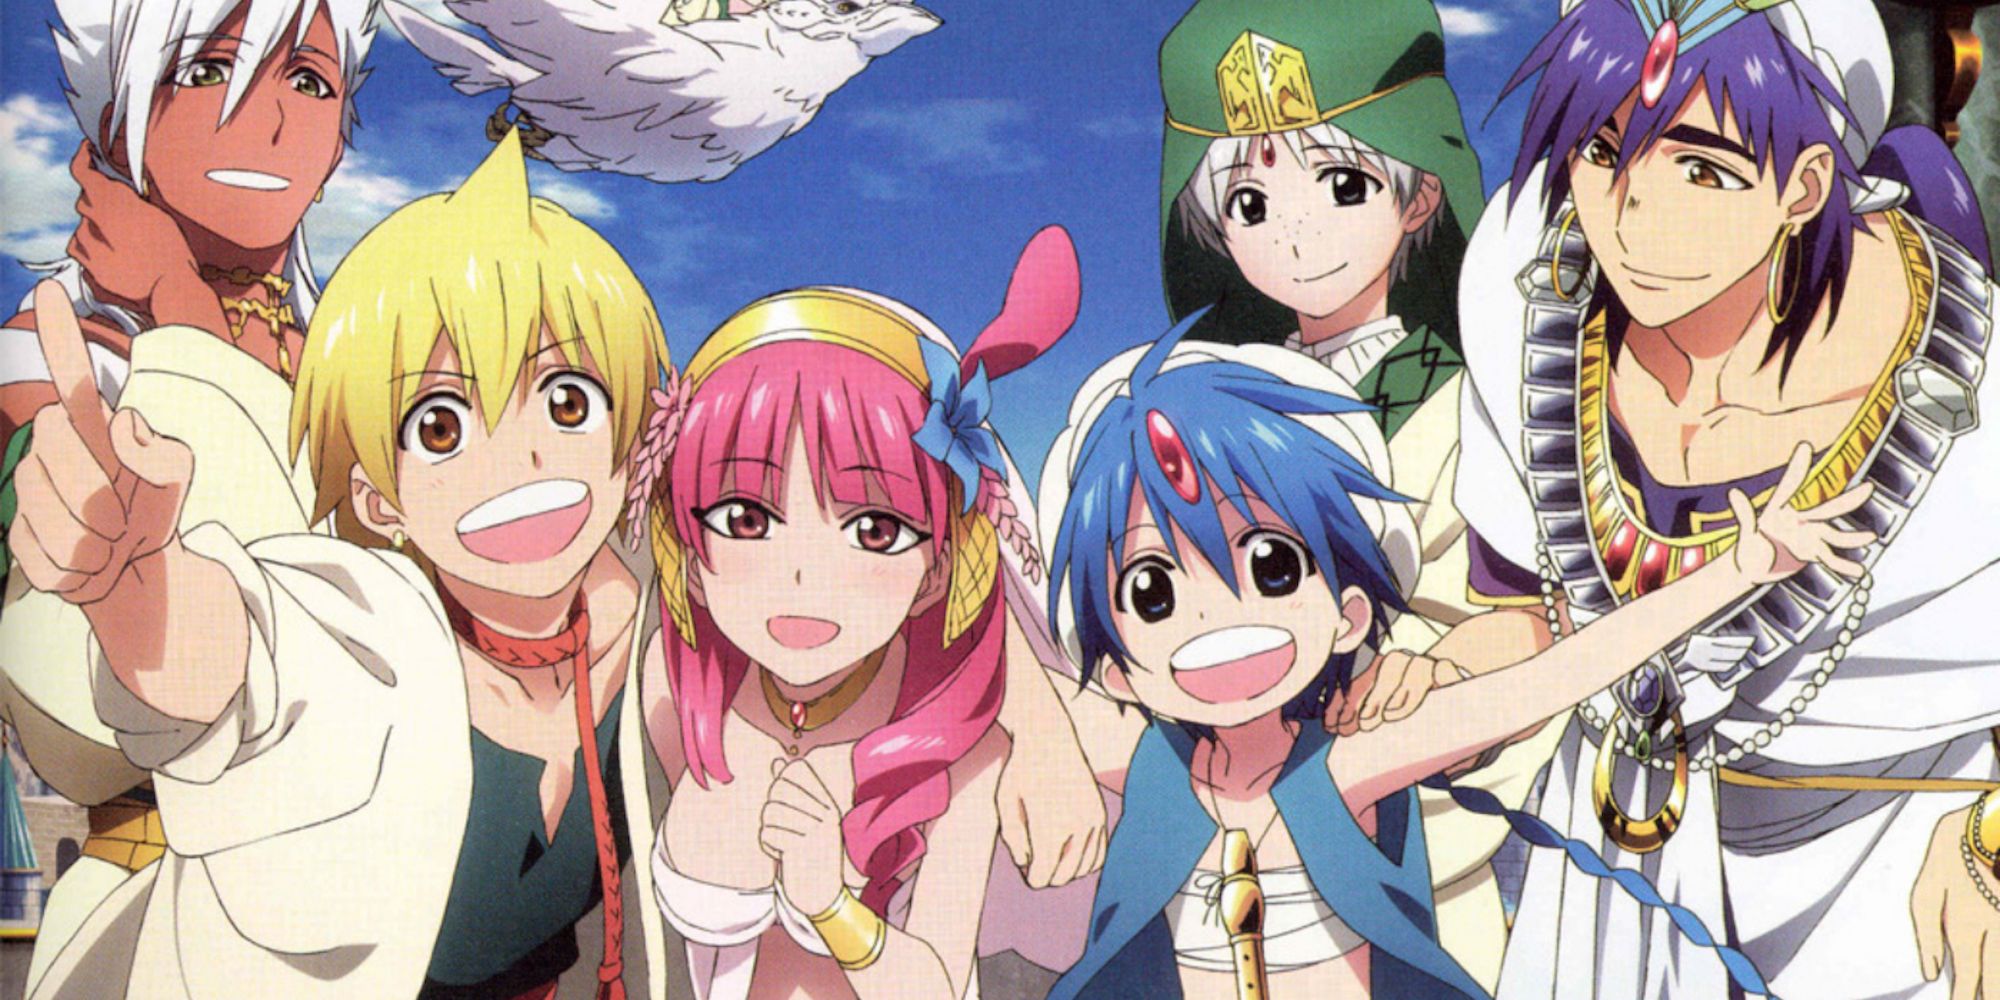 Promo art featuring characters in Magi The Labyrinth of Magic